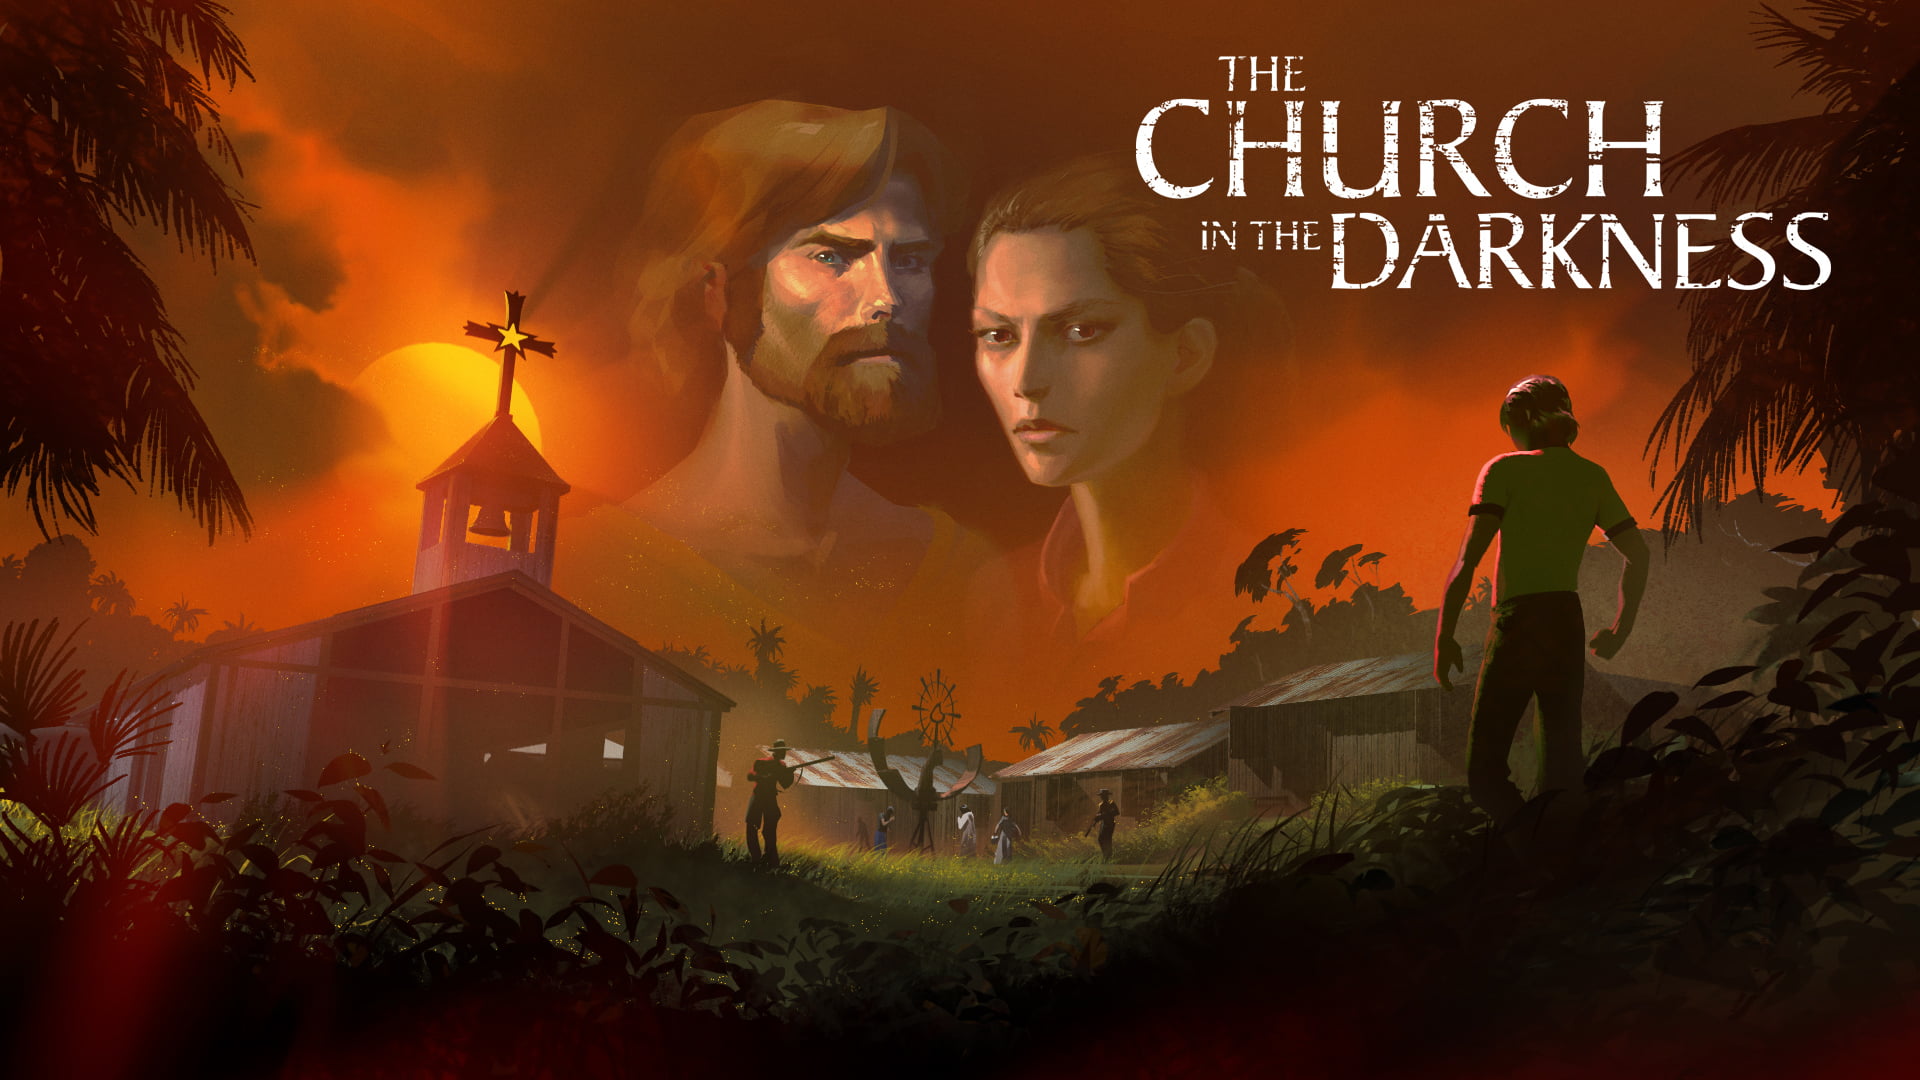 Dark pictures anthology | the church in the darkness - review | the church in the darkness | notícias